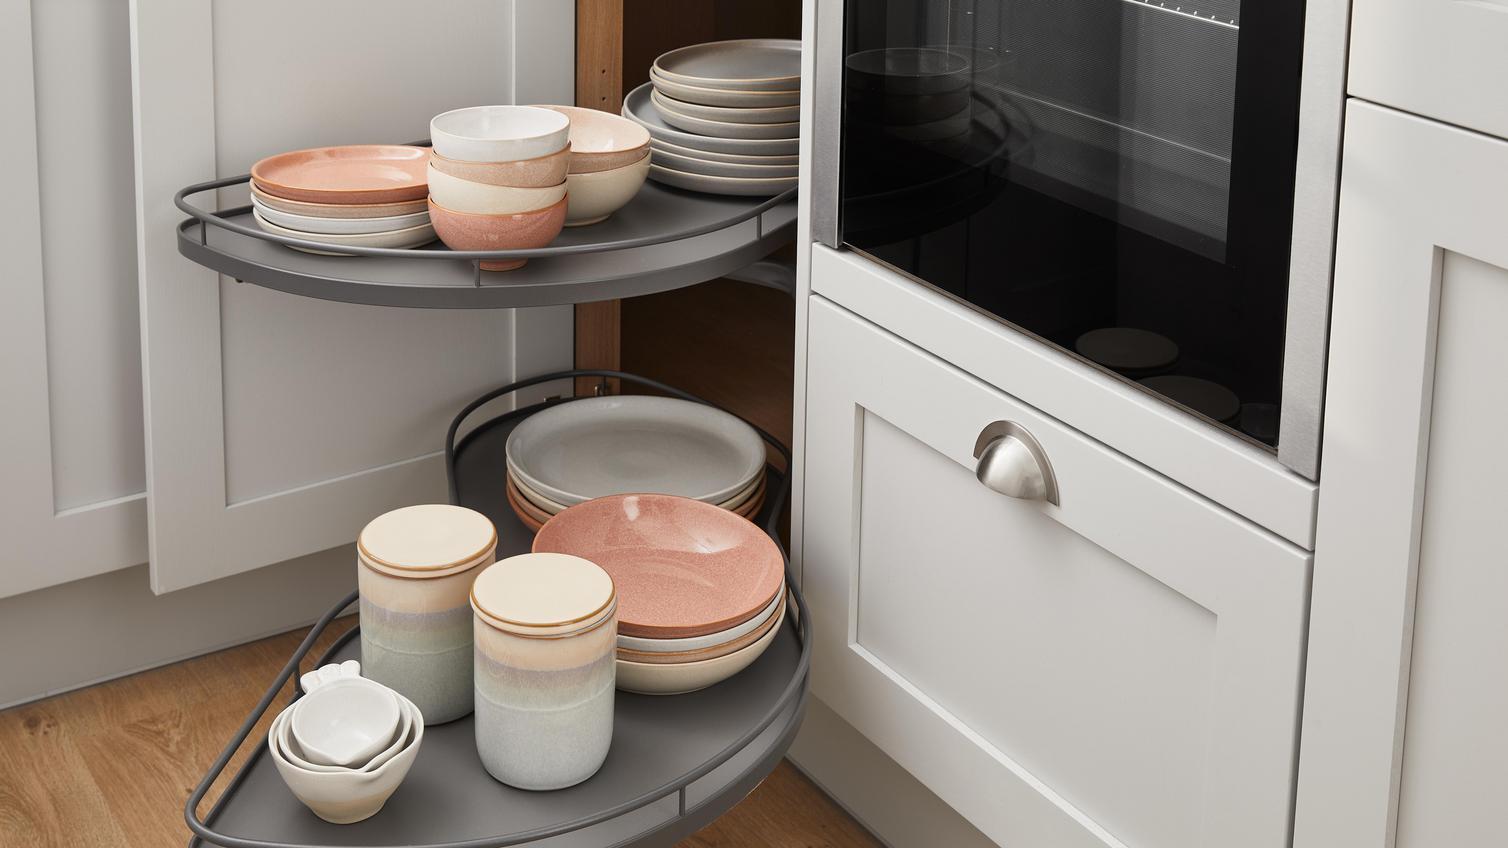 Ellen White's clever pull out corner storage options in a bright kitchen